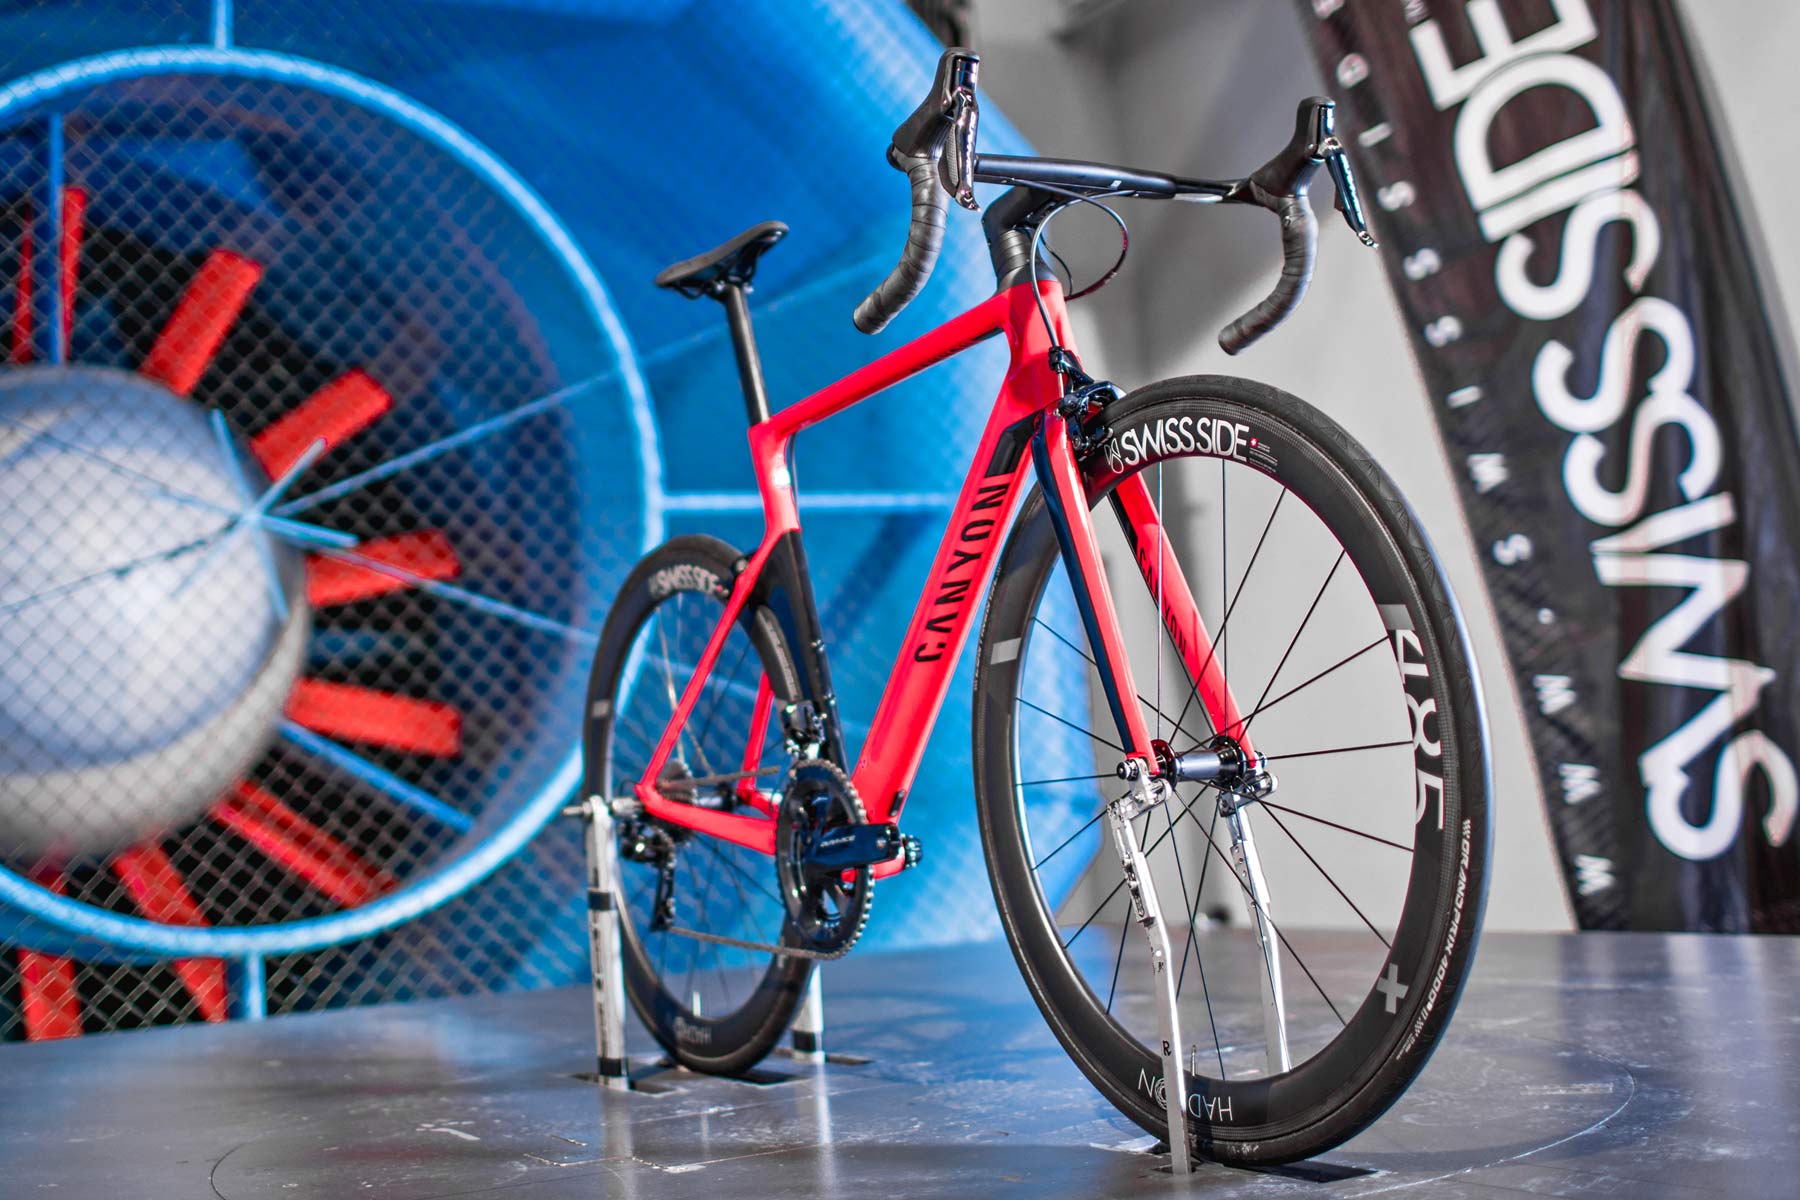 Swiss Side slashes prices, slices wind with 2019 Hadron carbon wheels